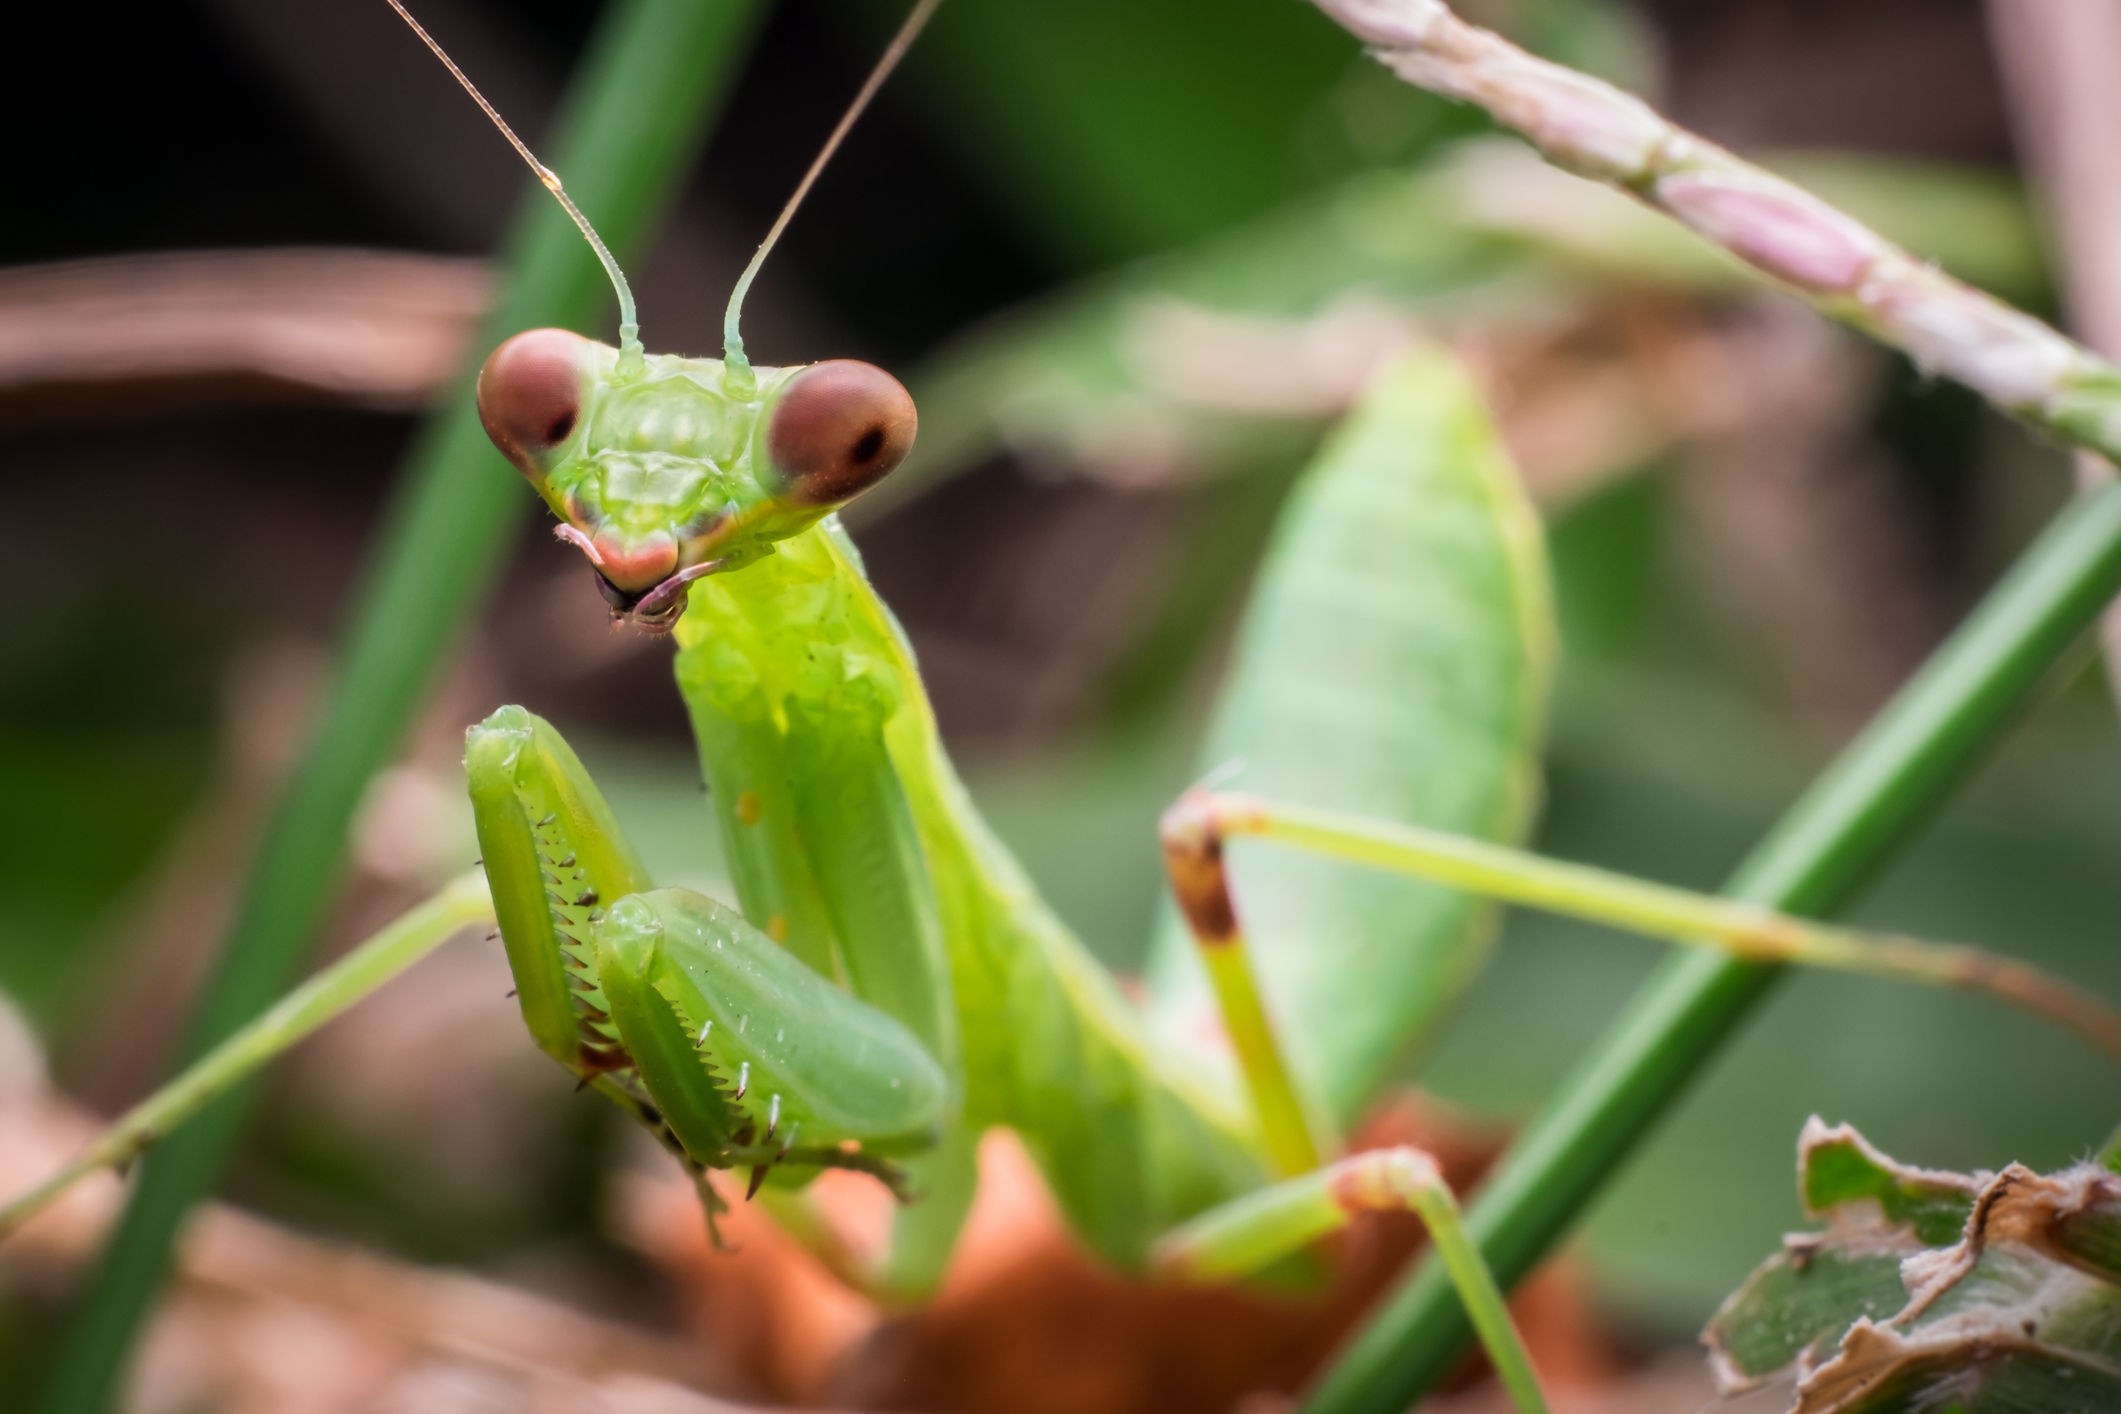 'Like a mountain lion in your landscape' Praying mantises